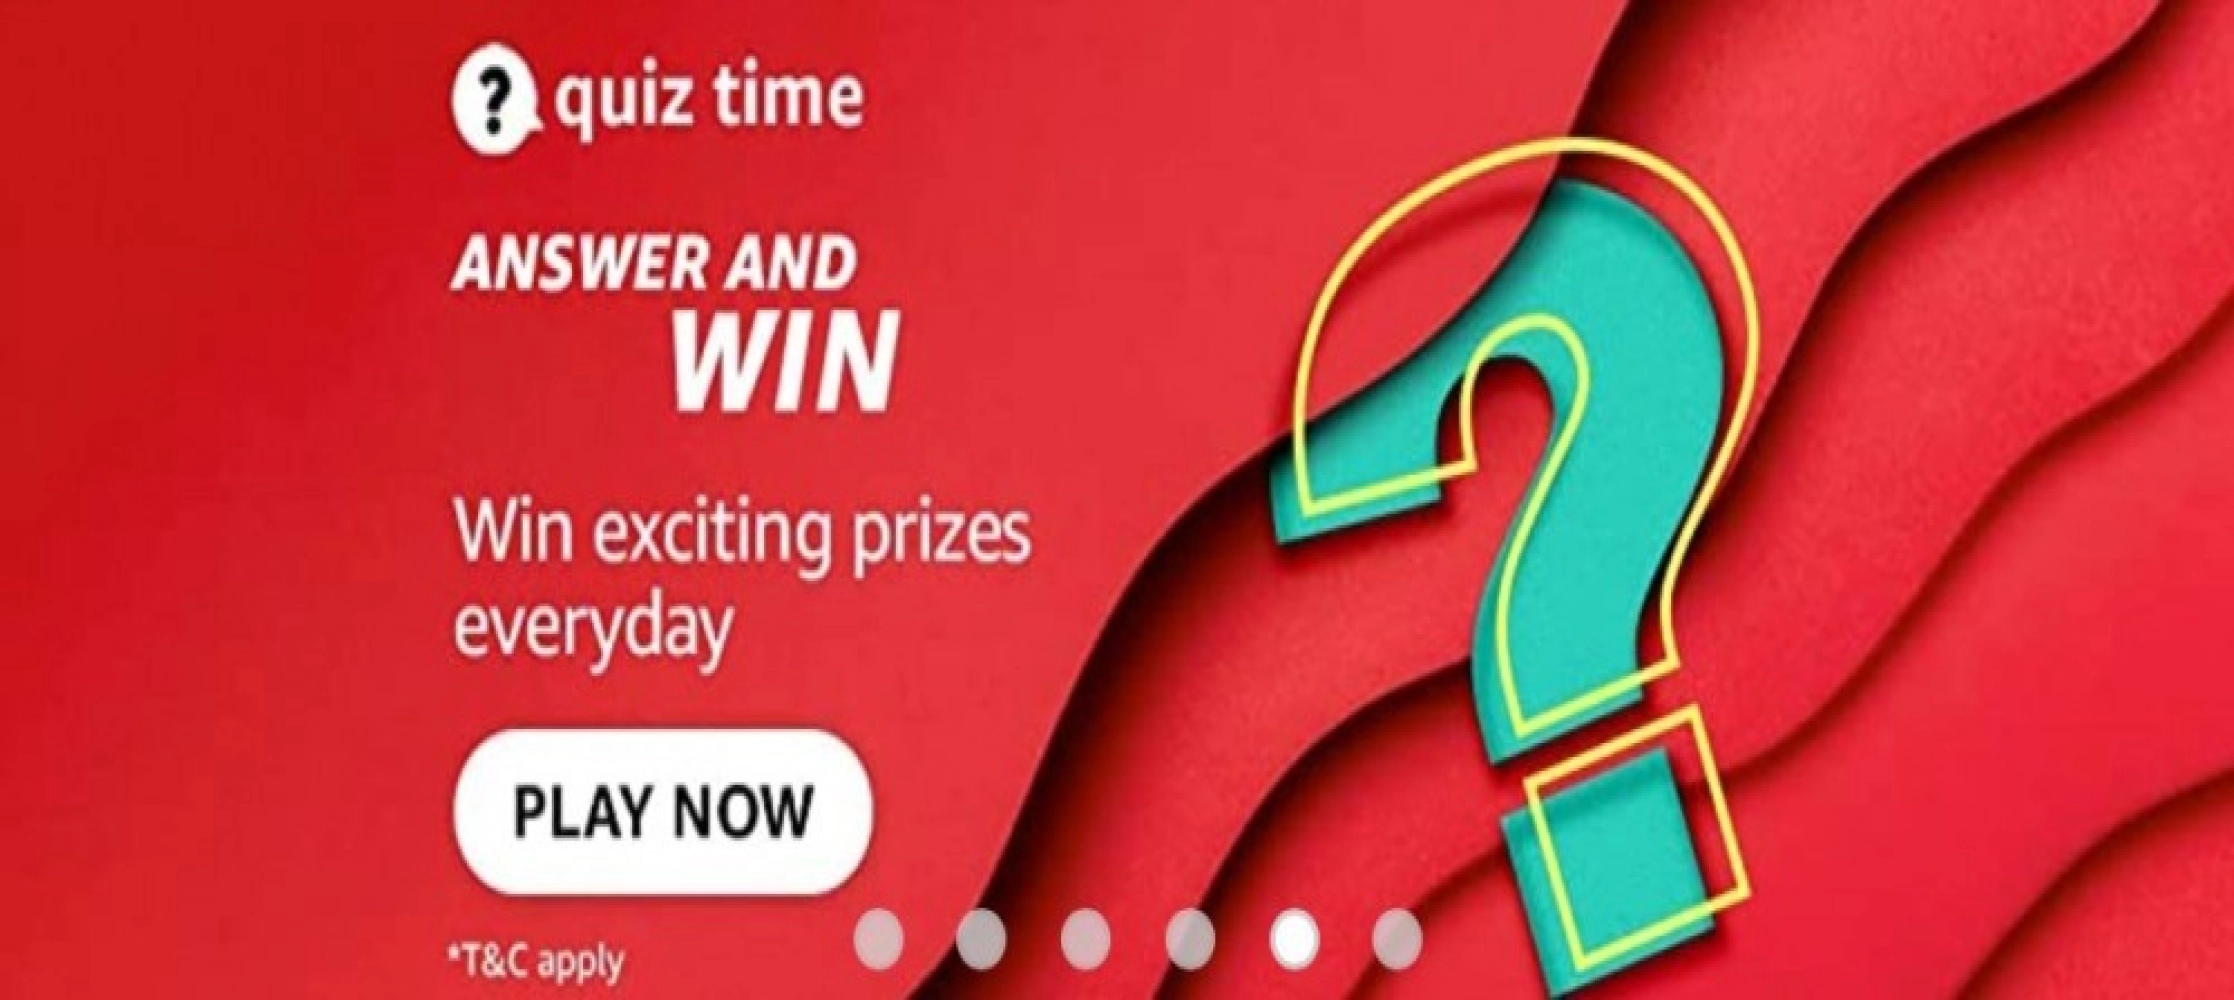 AMAZON QUIZ CONTEST: 21 MAY, 2022 - ANSWER TODAY FOR THE QUESTIONS AND GET A CHANCE TO WIN AMAZON PAY RS.40,000